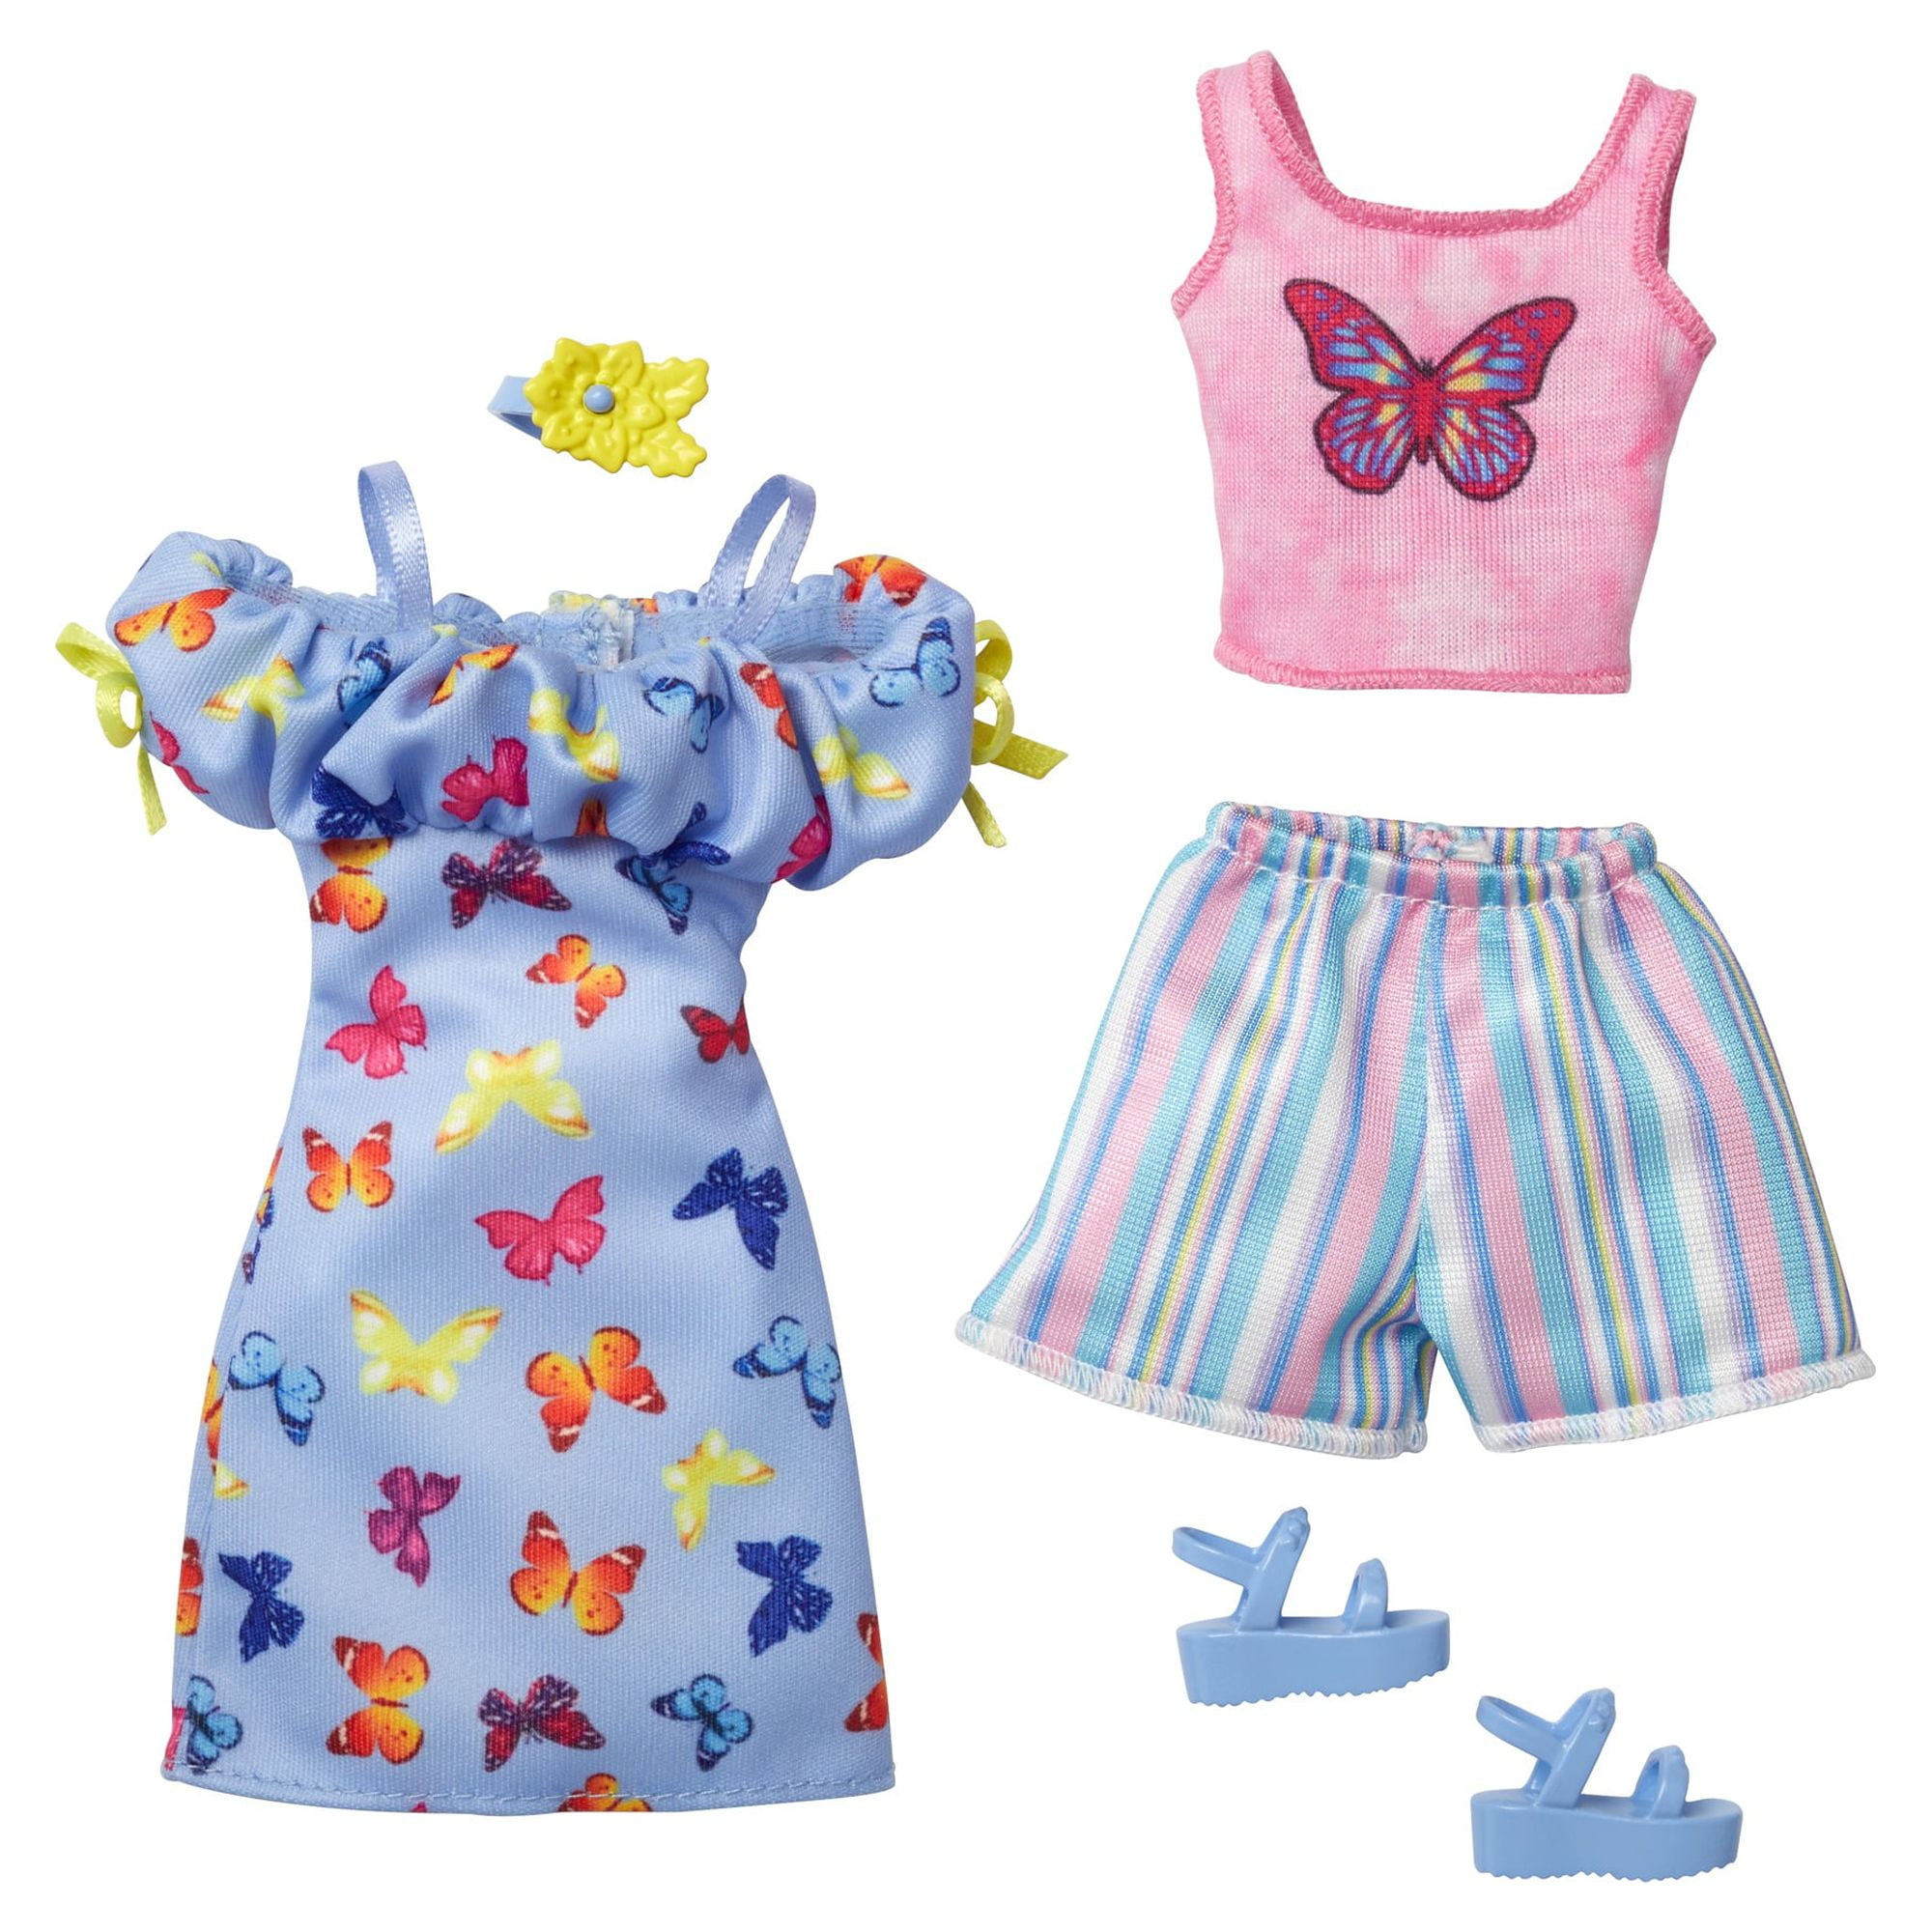 Barbie Doll Clothes & Accessories